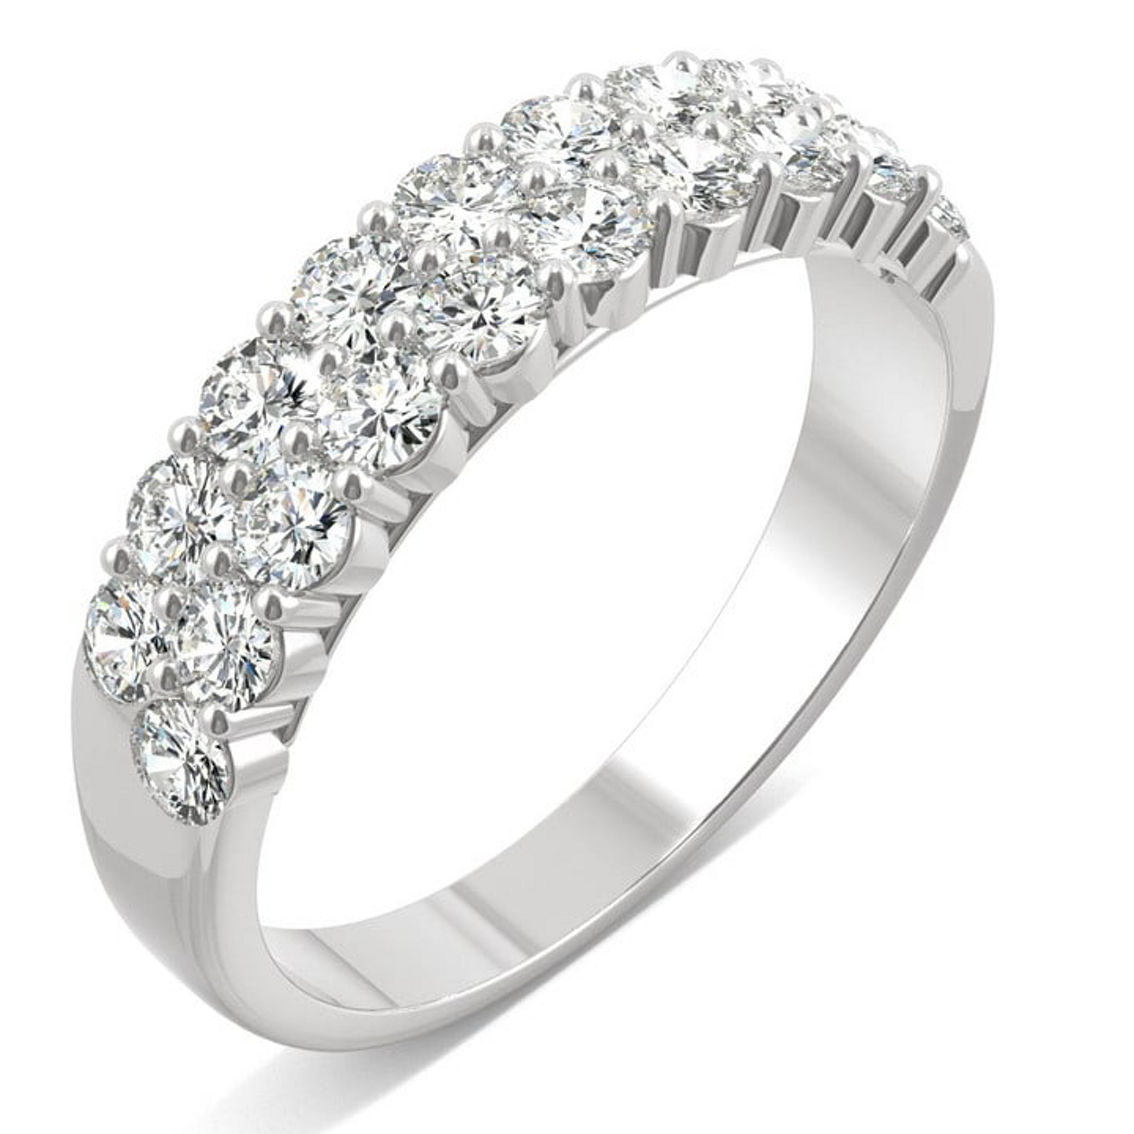 Charles & Colvard 1.00cttw Moissanite Two-Row Band in 14k White Gold - Image 2 of 5